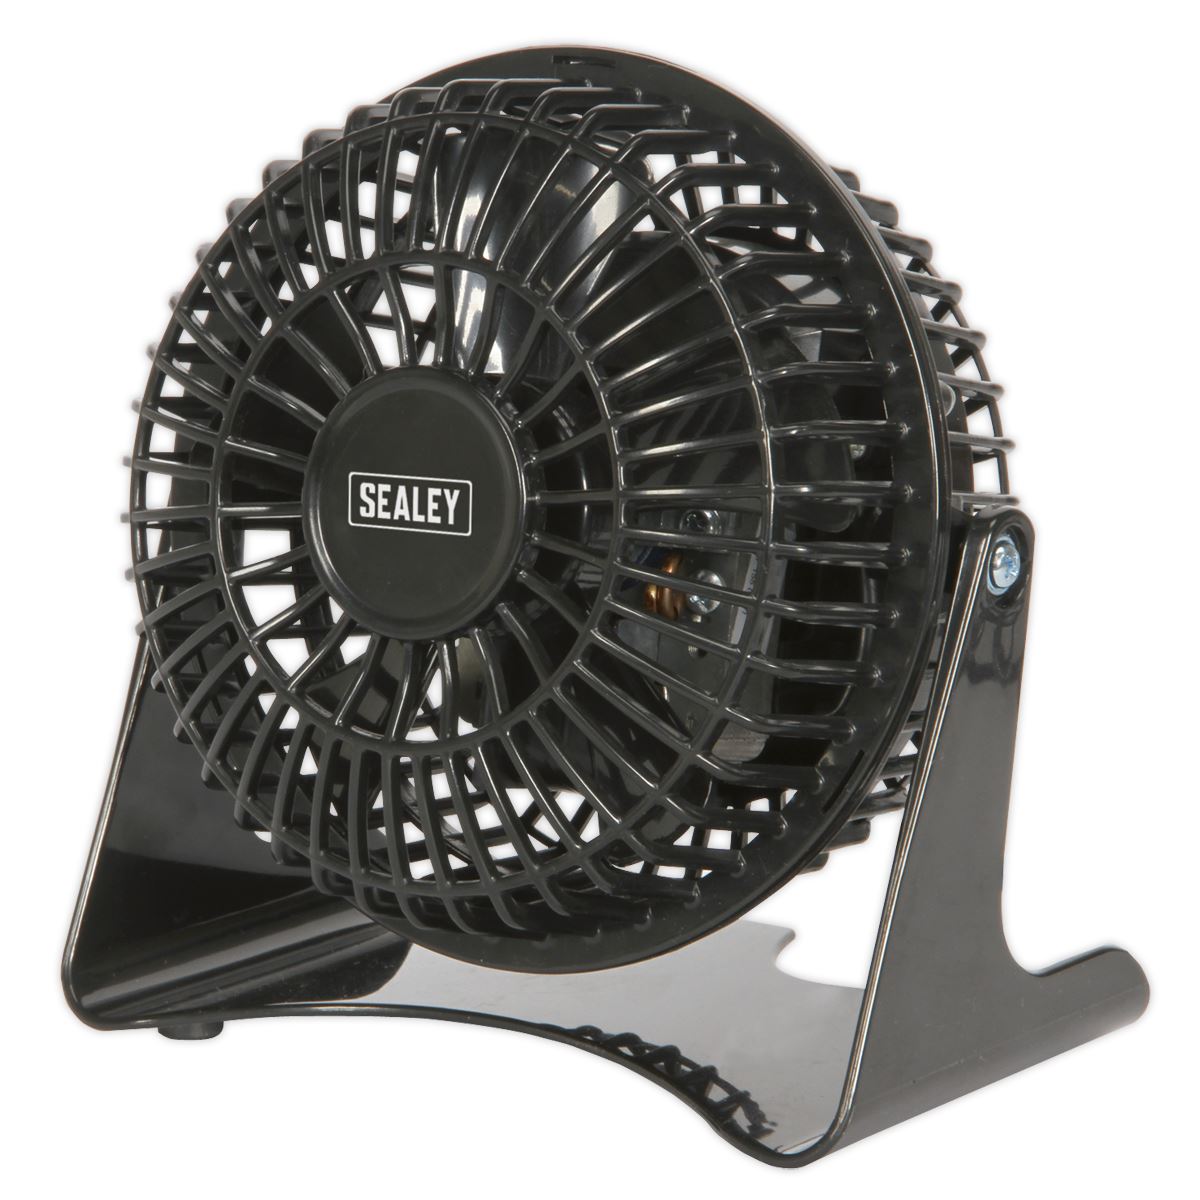 Sealey 4" Mini Desk Fan 230V Bedside Table Air Conditioning Summer Pivoting